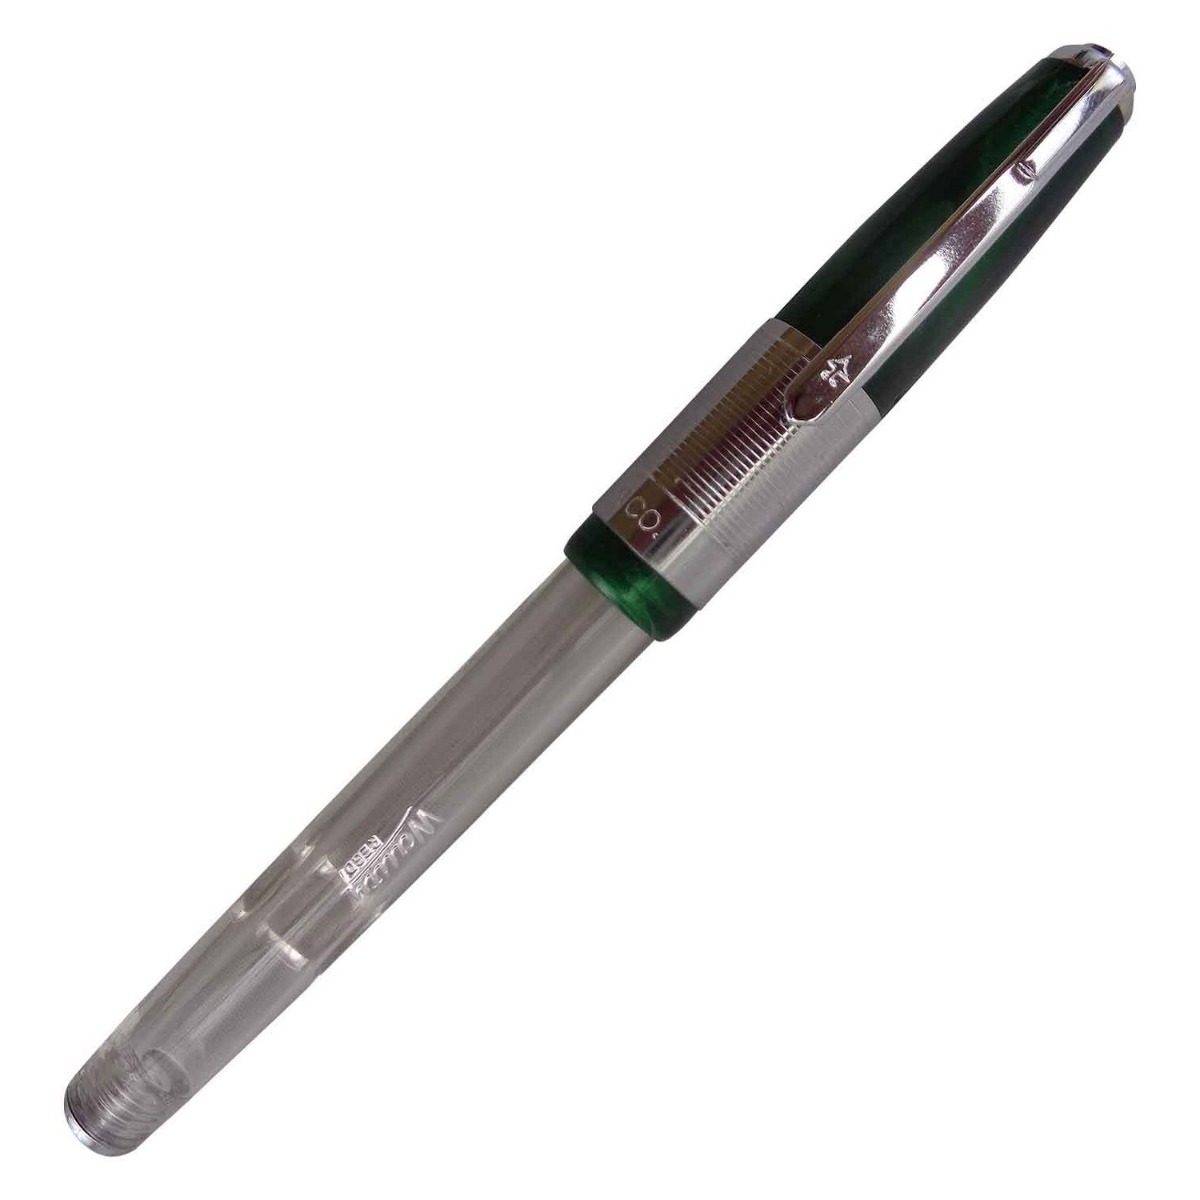 Wality 70T Regd   Model:16030  Green Color Marble Finish Design Cap And Transprant Body With Silver Clip Cap Type Fine Tip Fountain Pen